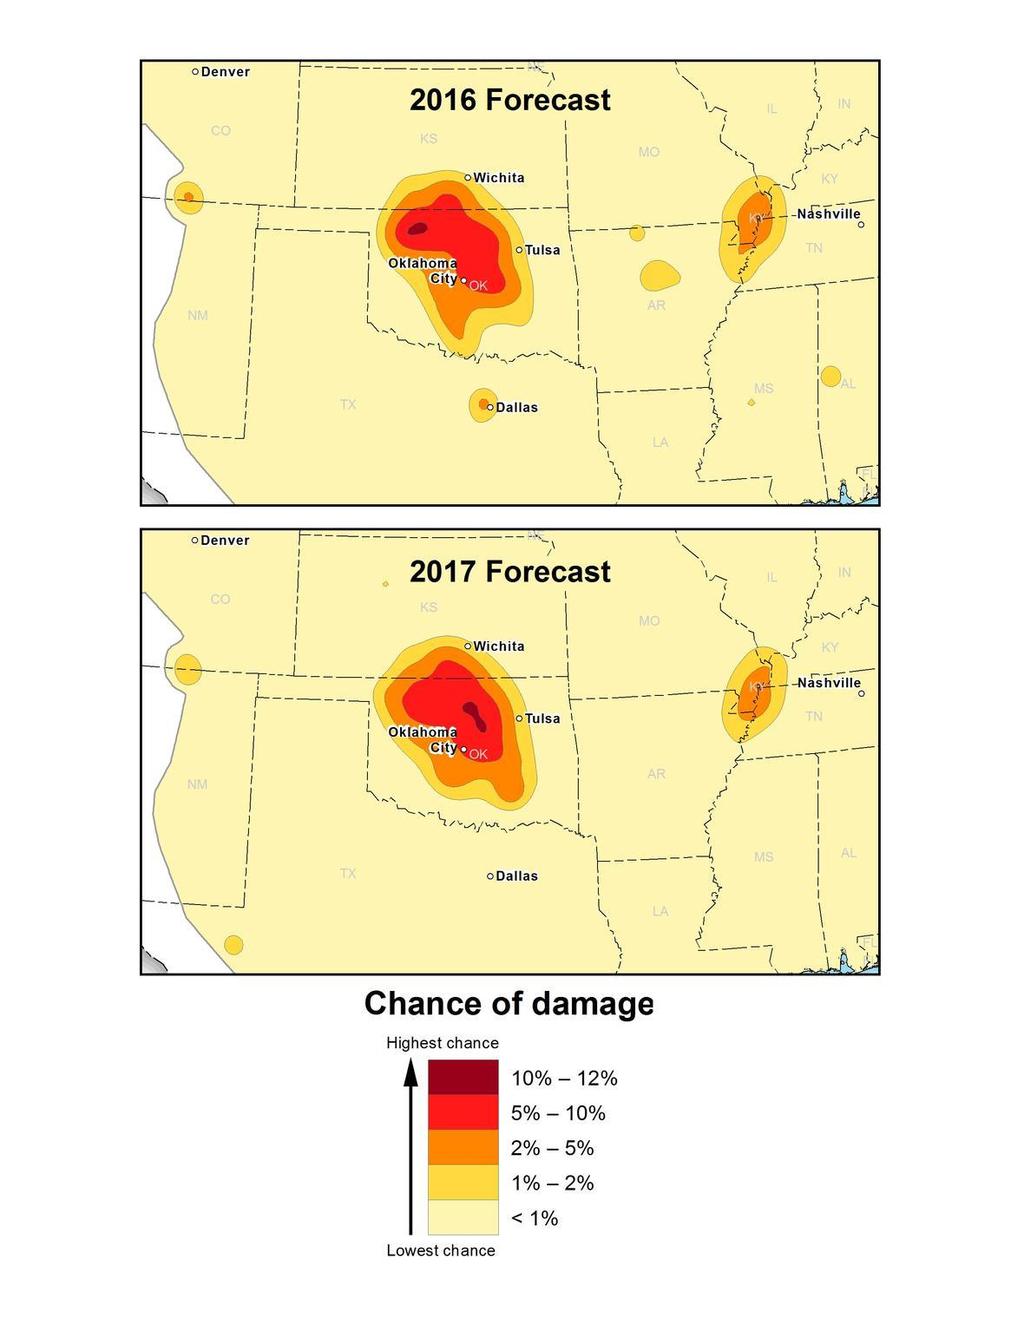 the 2016 forecast has been used by engineers to evaluate earthquake safety of buildings, bridges, pipelines and other important